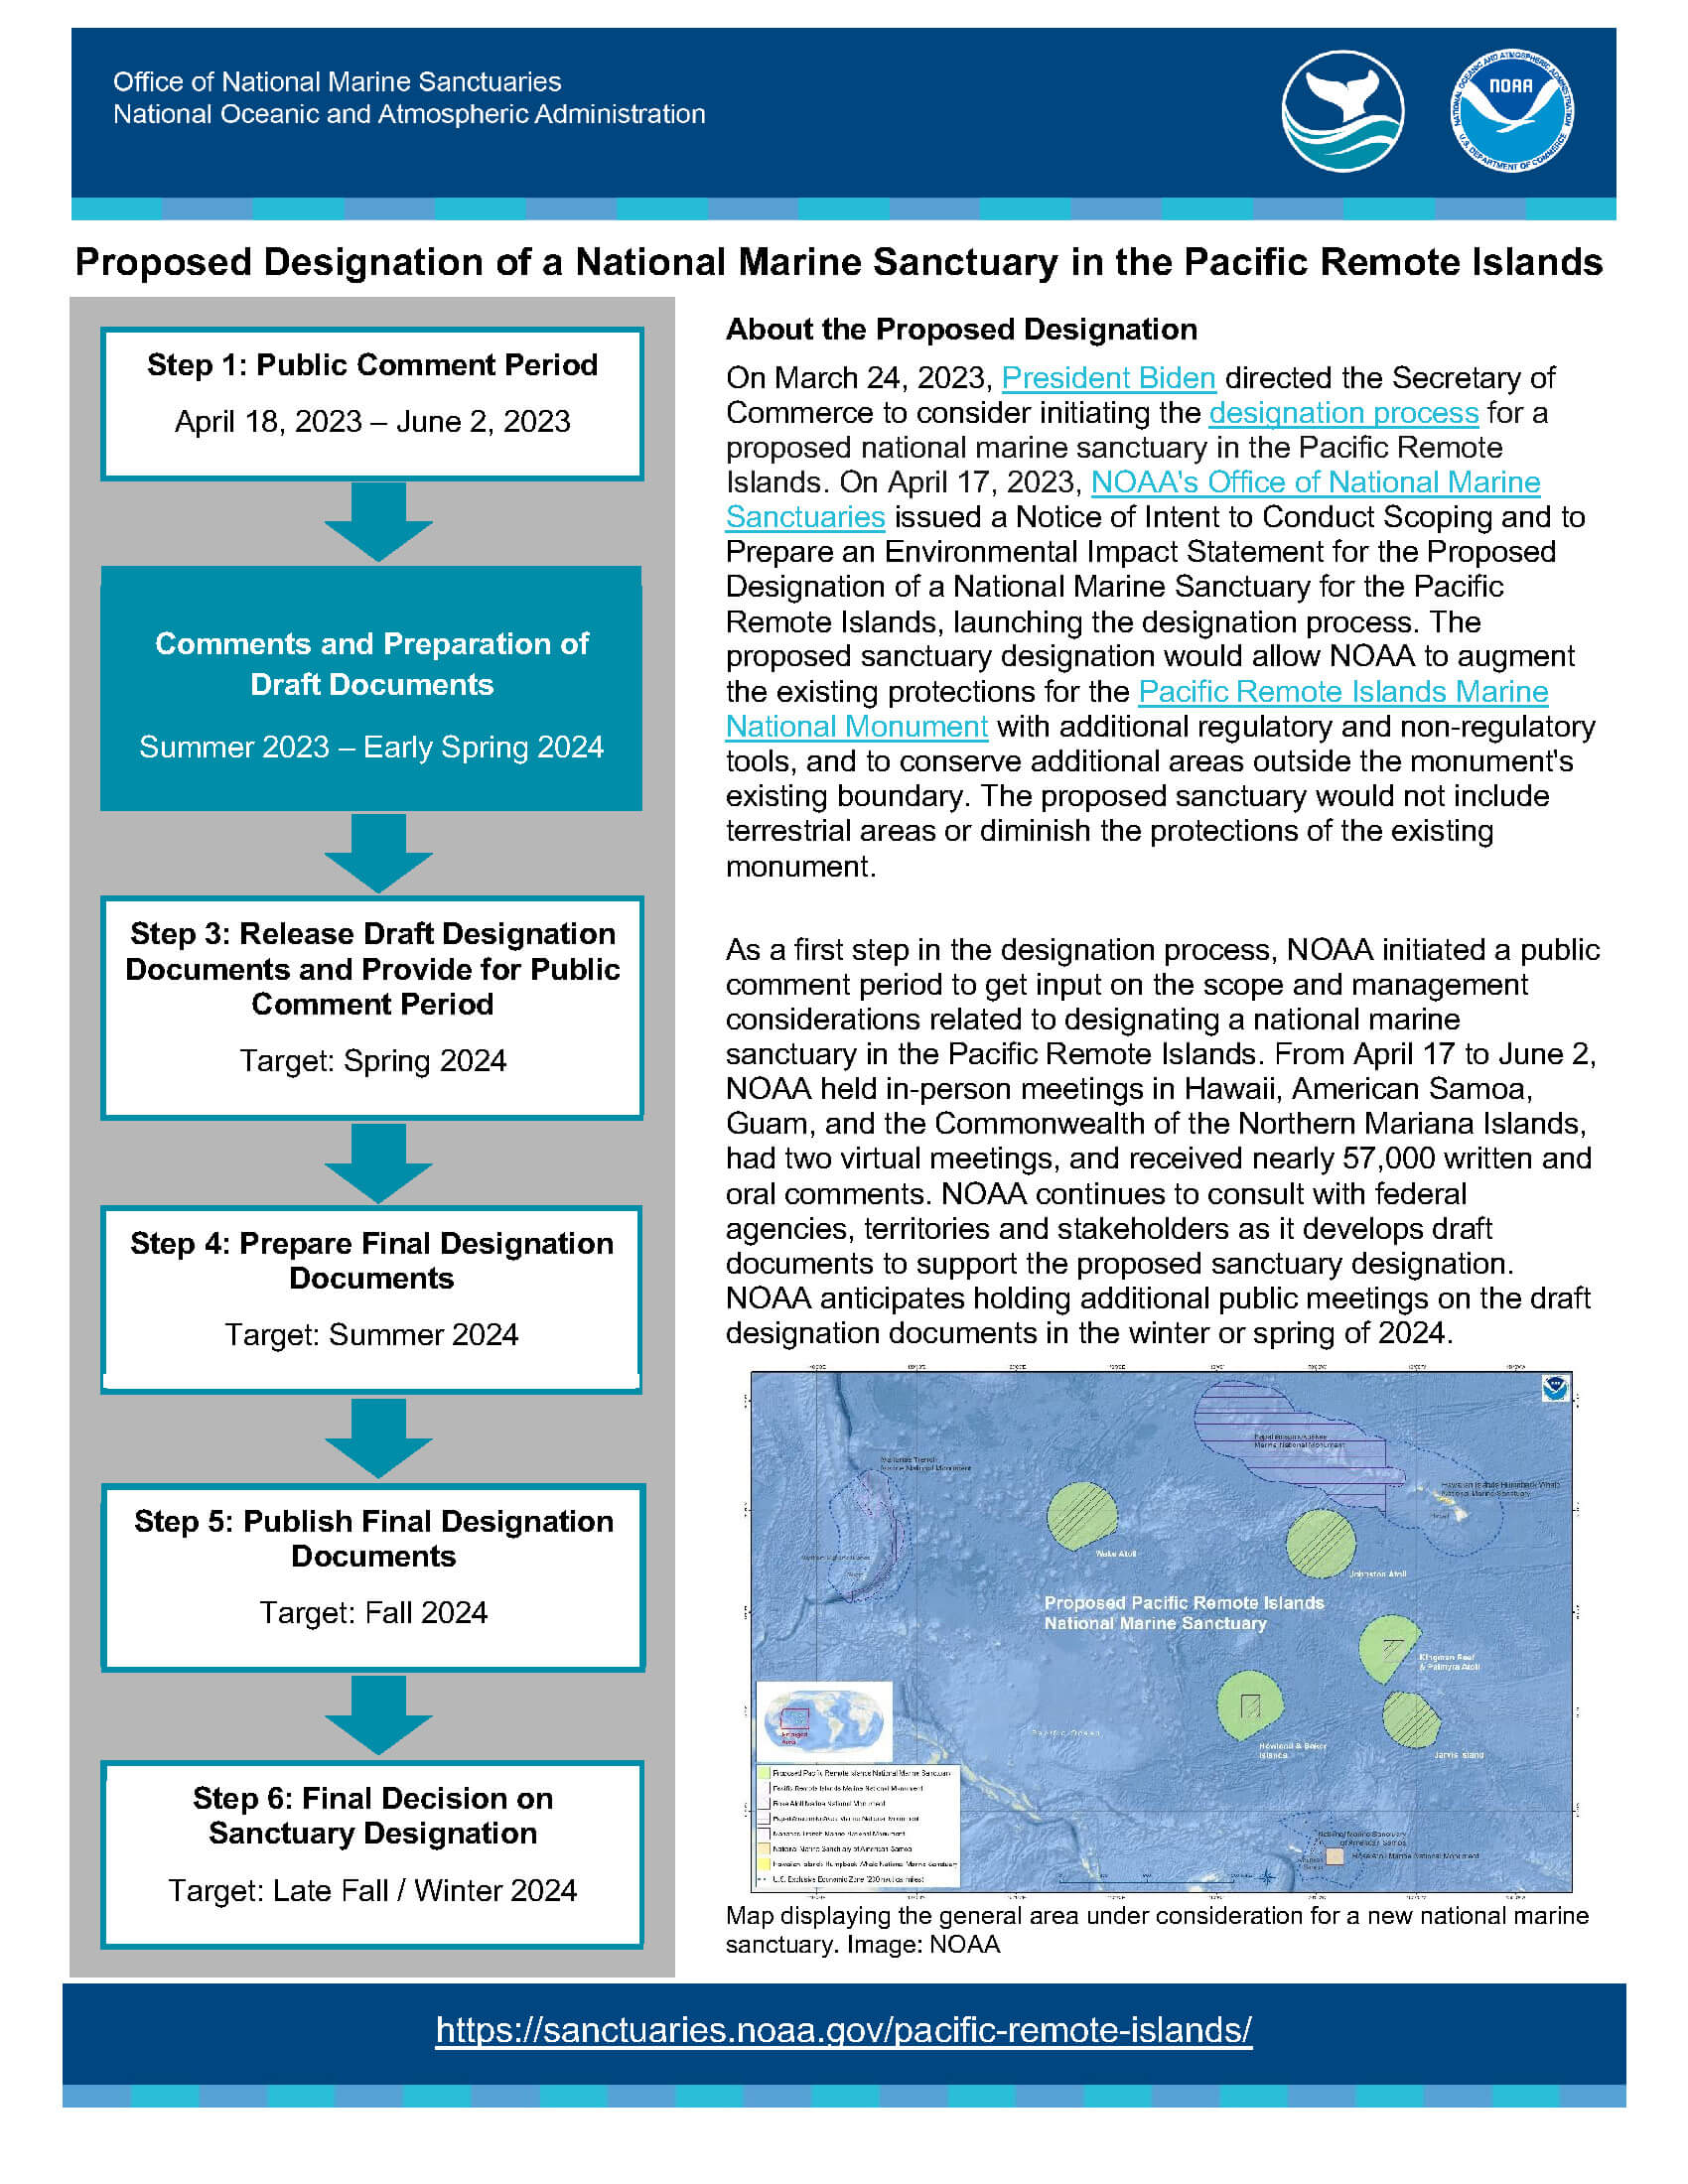 Proposed Designation of Pacific Remote Islands National Marine Sanctuary Fact Sheet